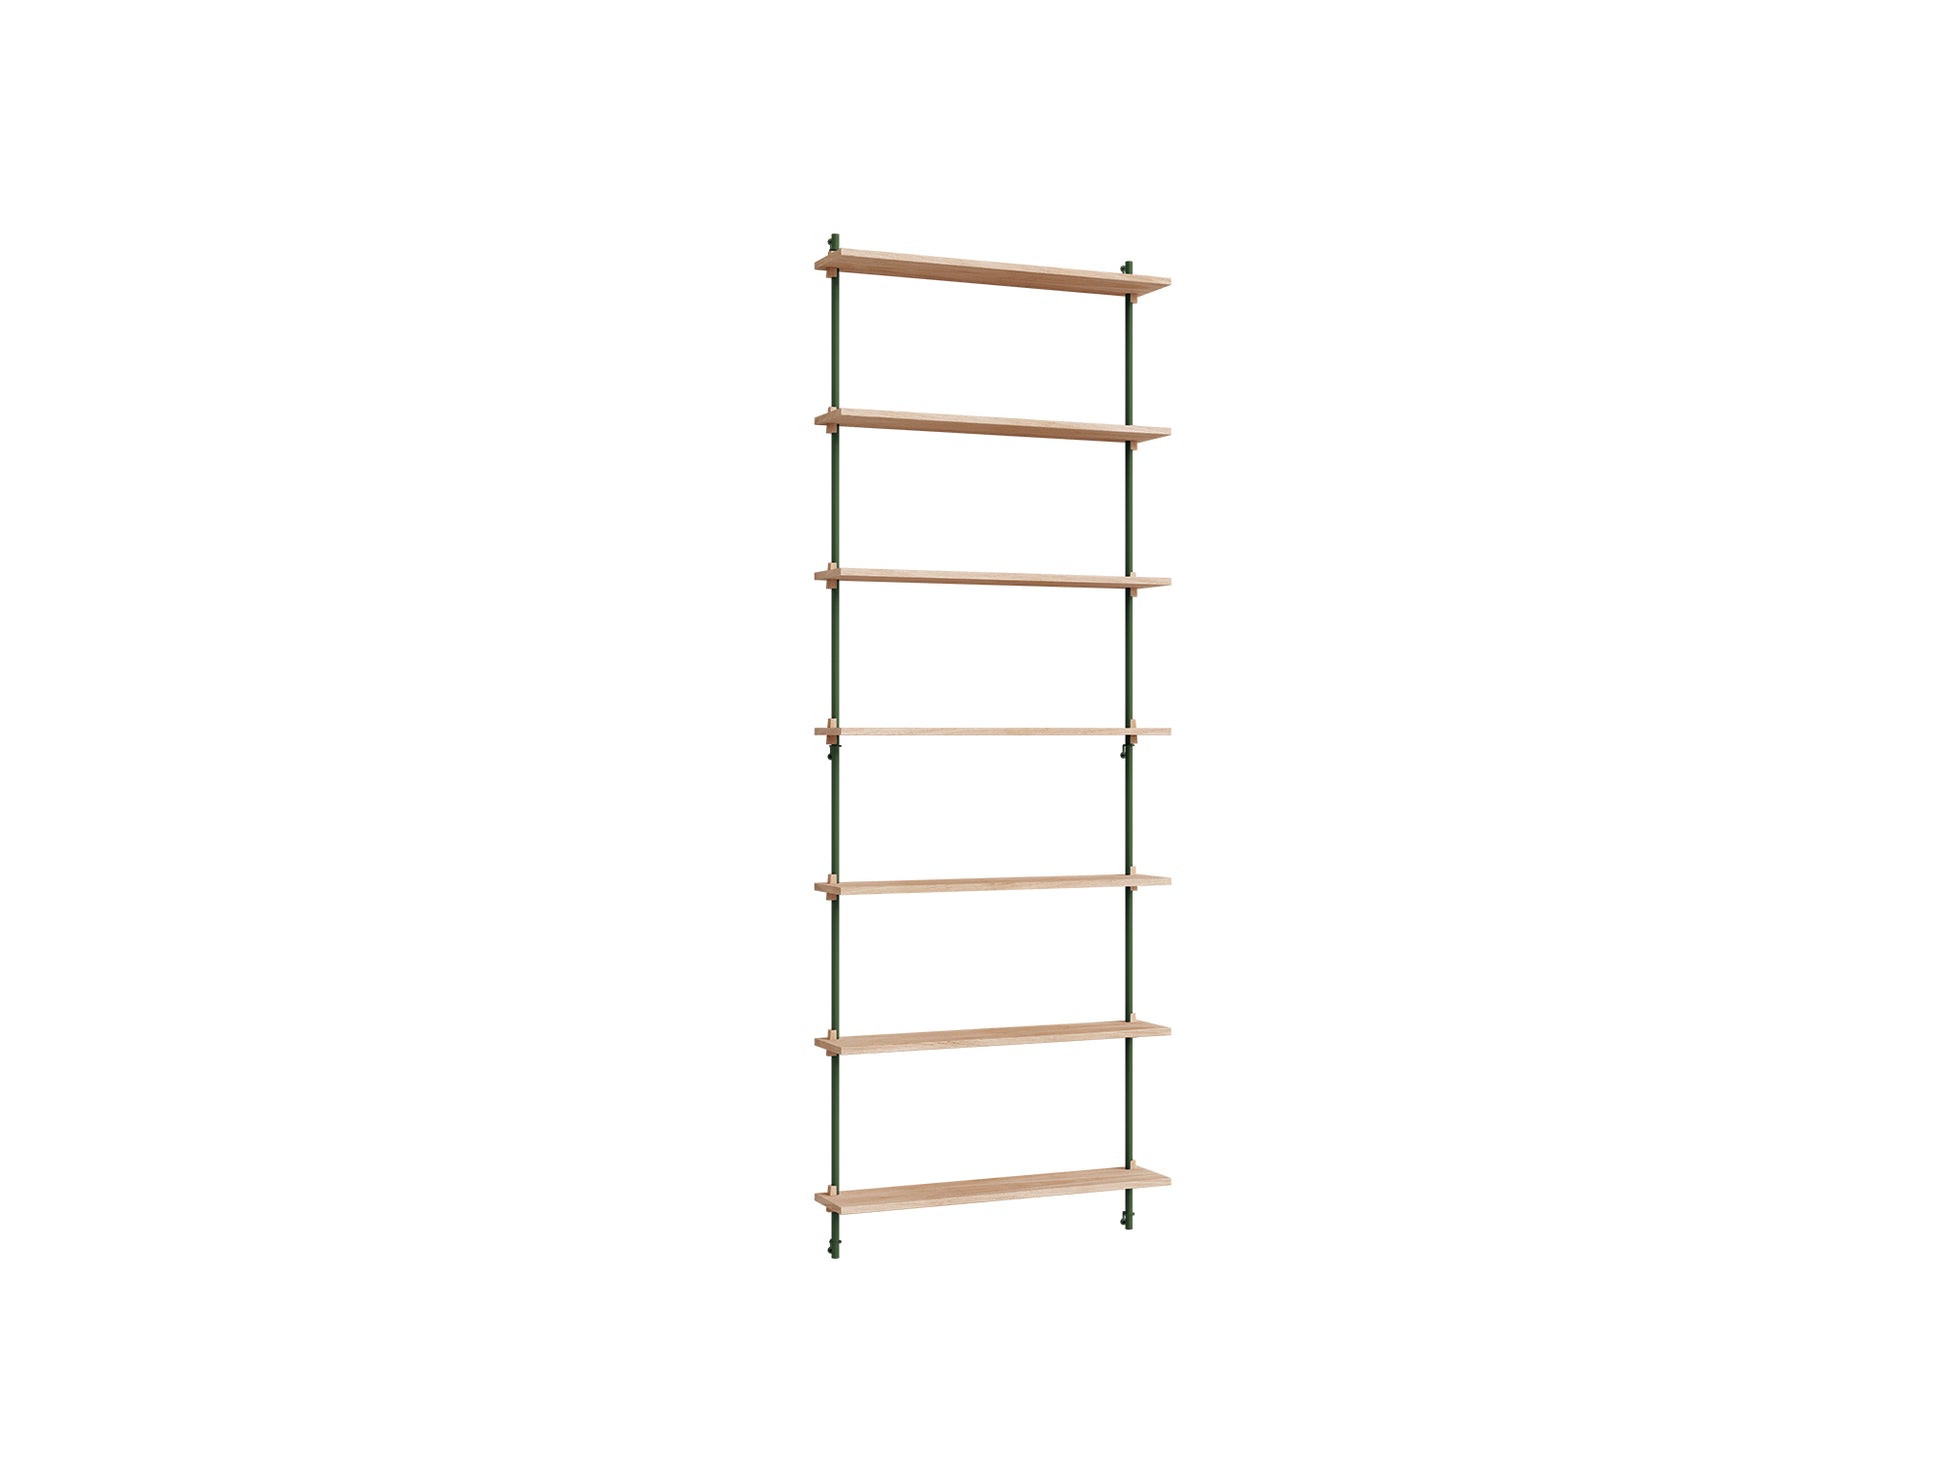 Wall Shelving System Sets (230 cm) by Moebe - WS.230.1 / Pine Green Uprights / Oiled Oak